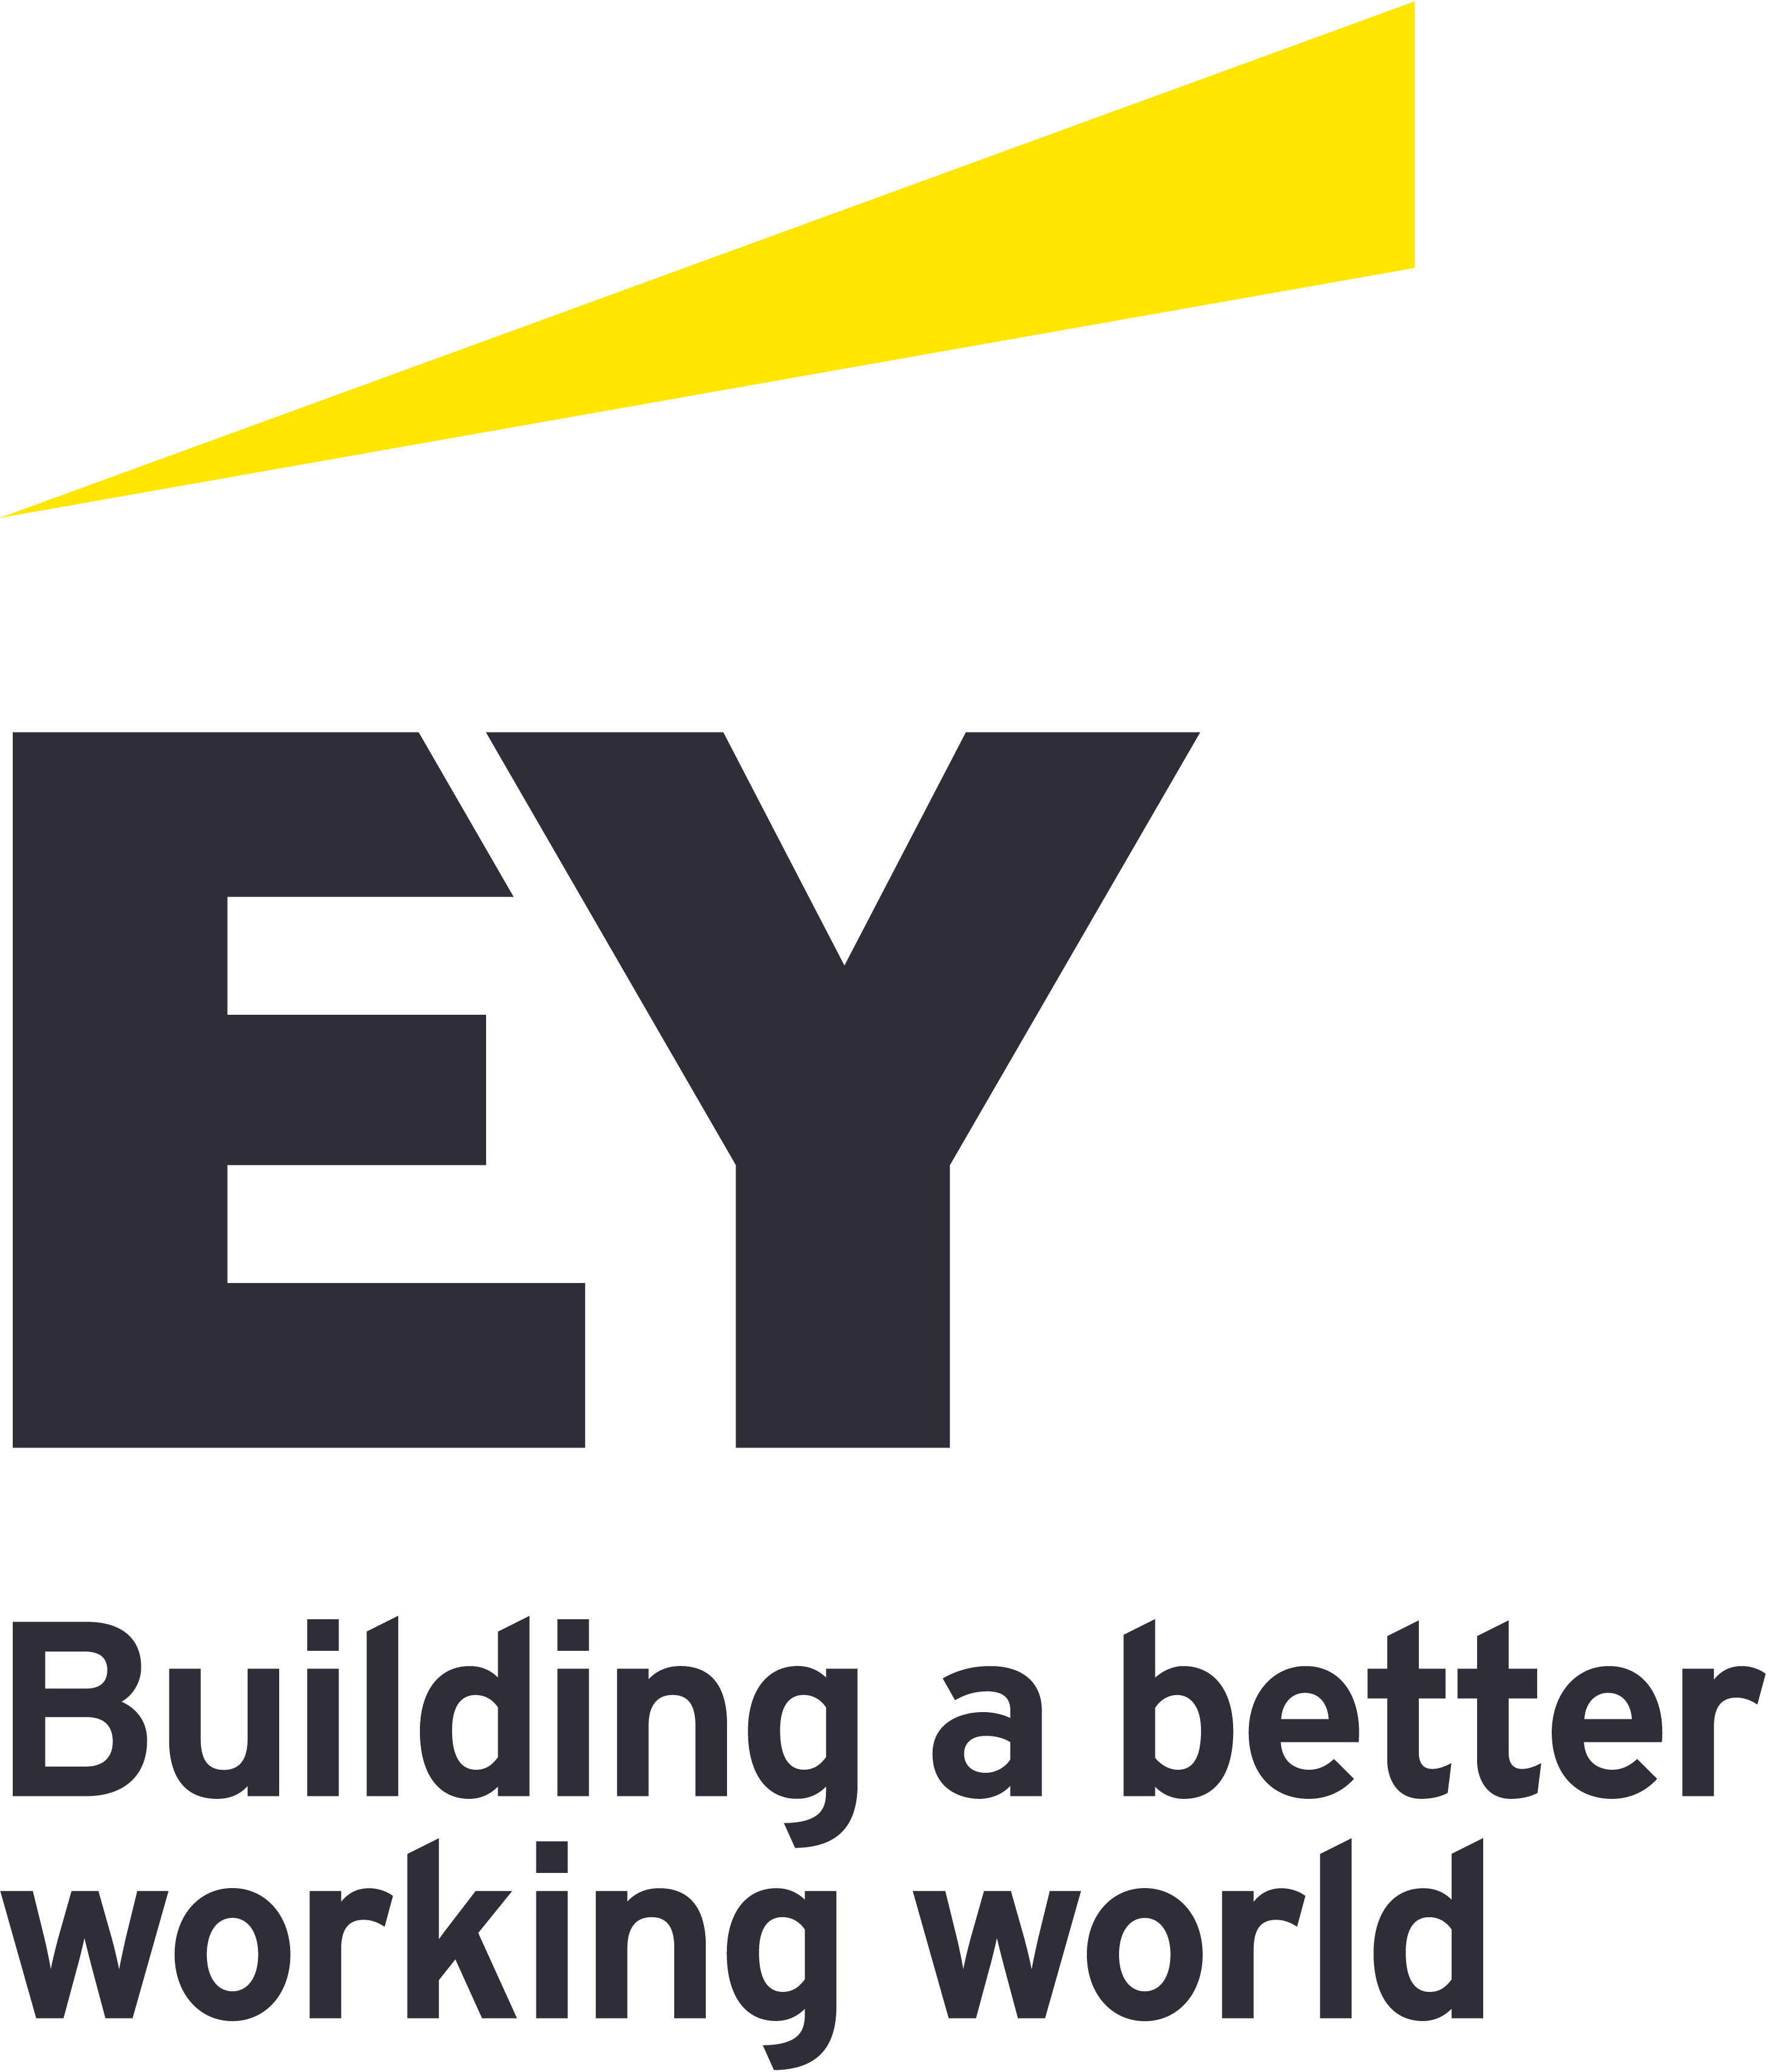 https://www.pro-manchester.co.uk/wp-content/uploads/2014/03/EY_Logo_Beam_Tag_Stacked_RGB_EN.png